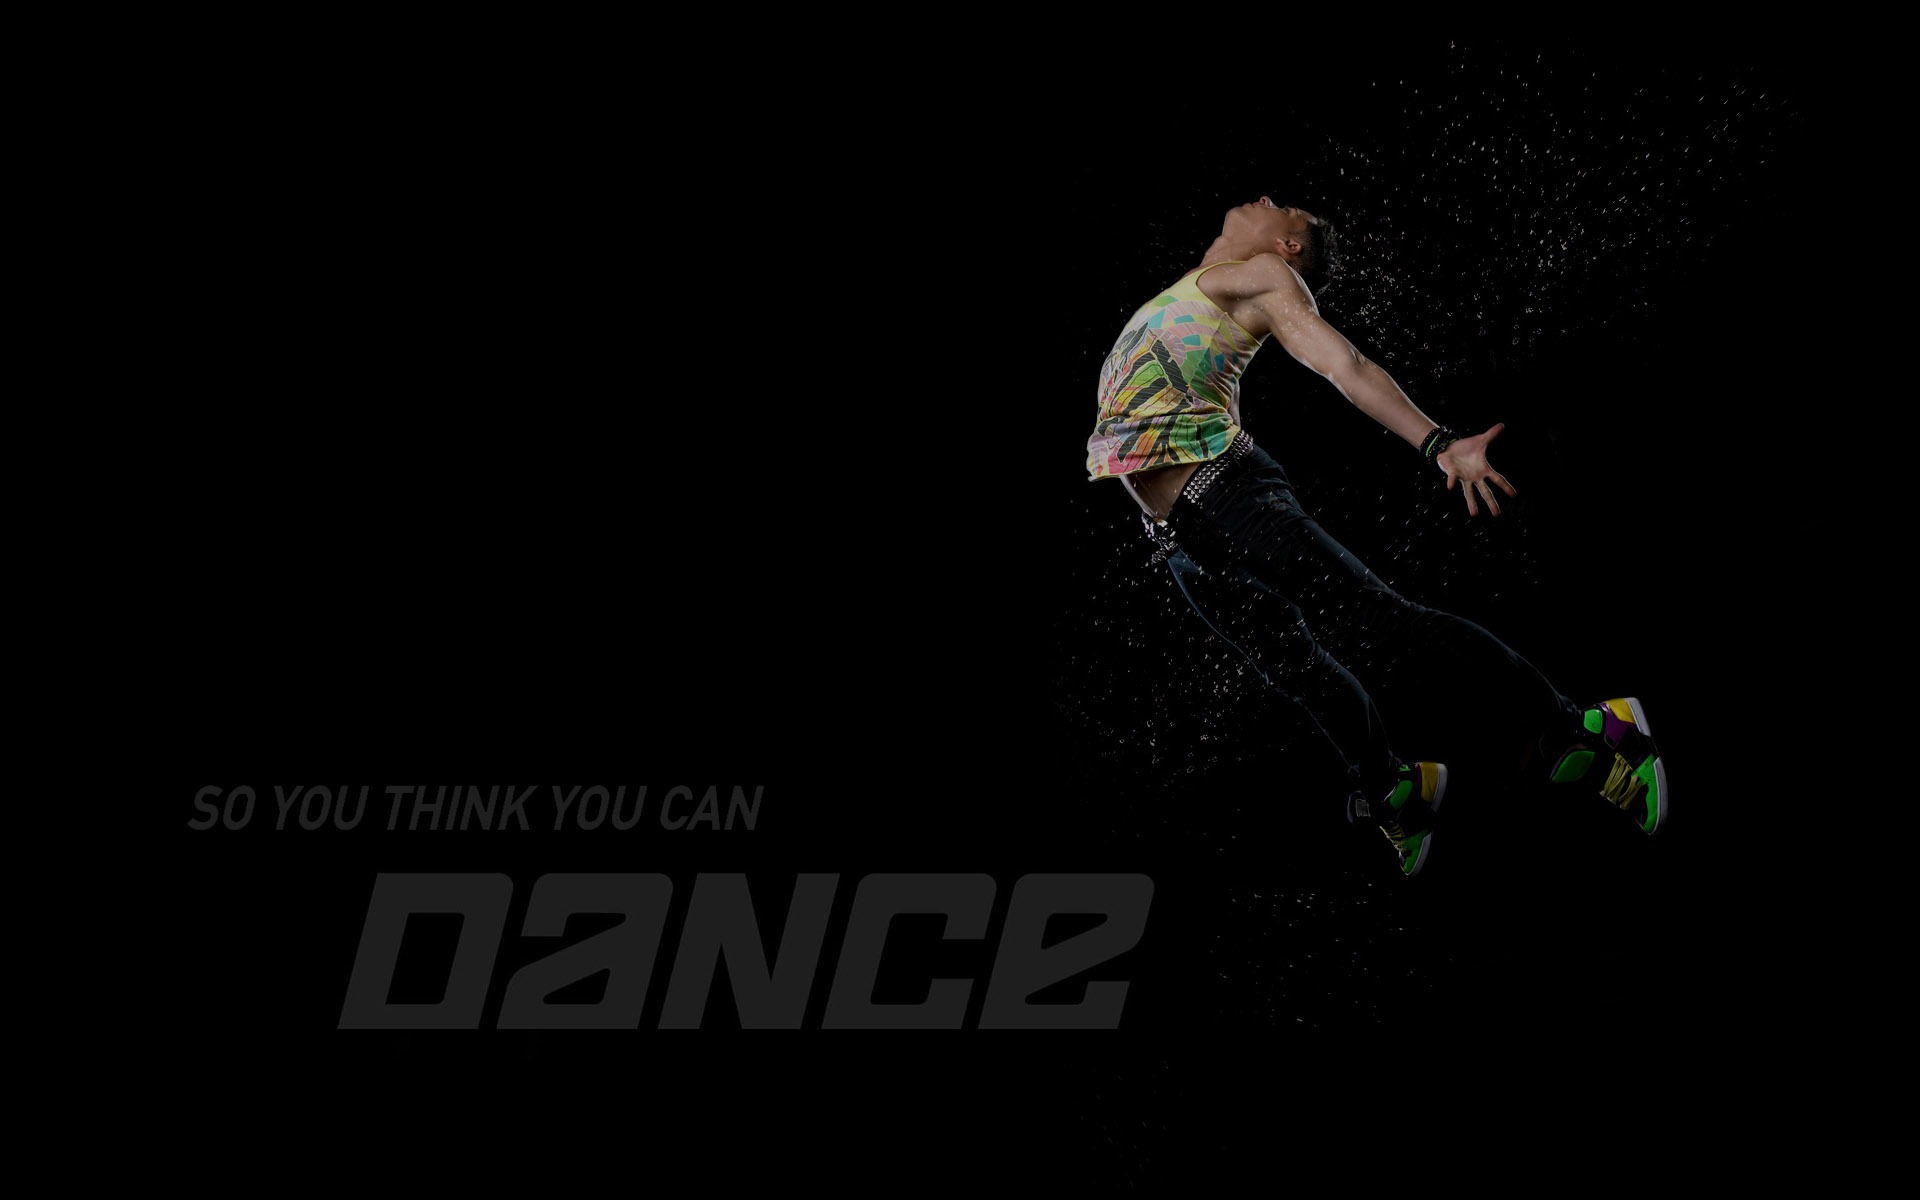 So You Think You Can Dance 舞林争霸 壁纸(二)6 - 1920x1200